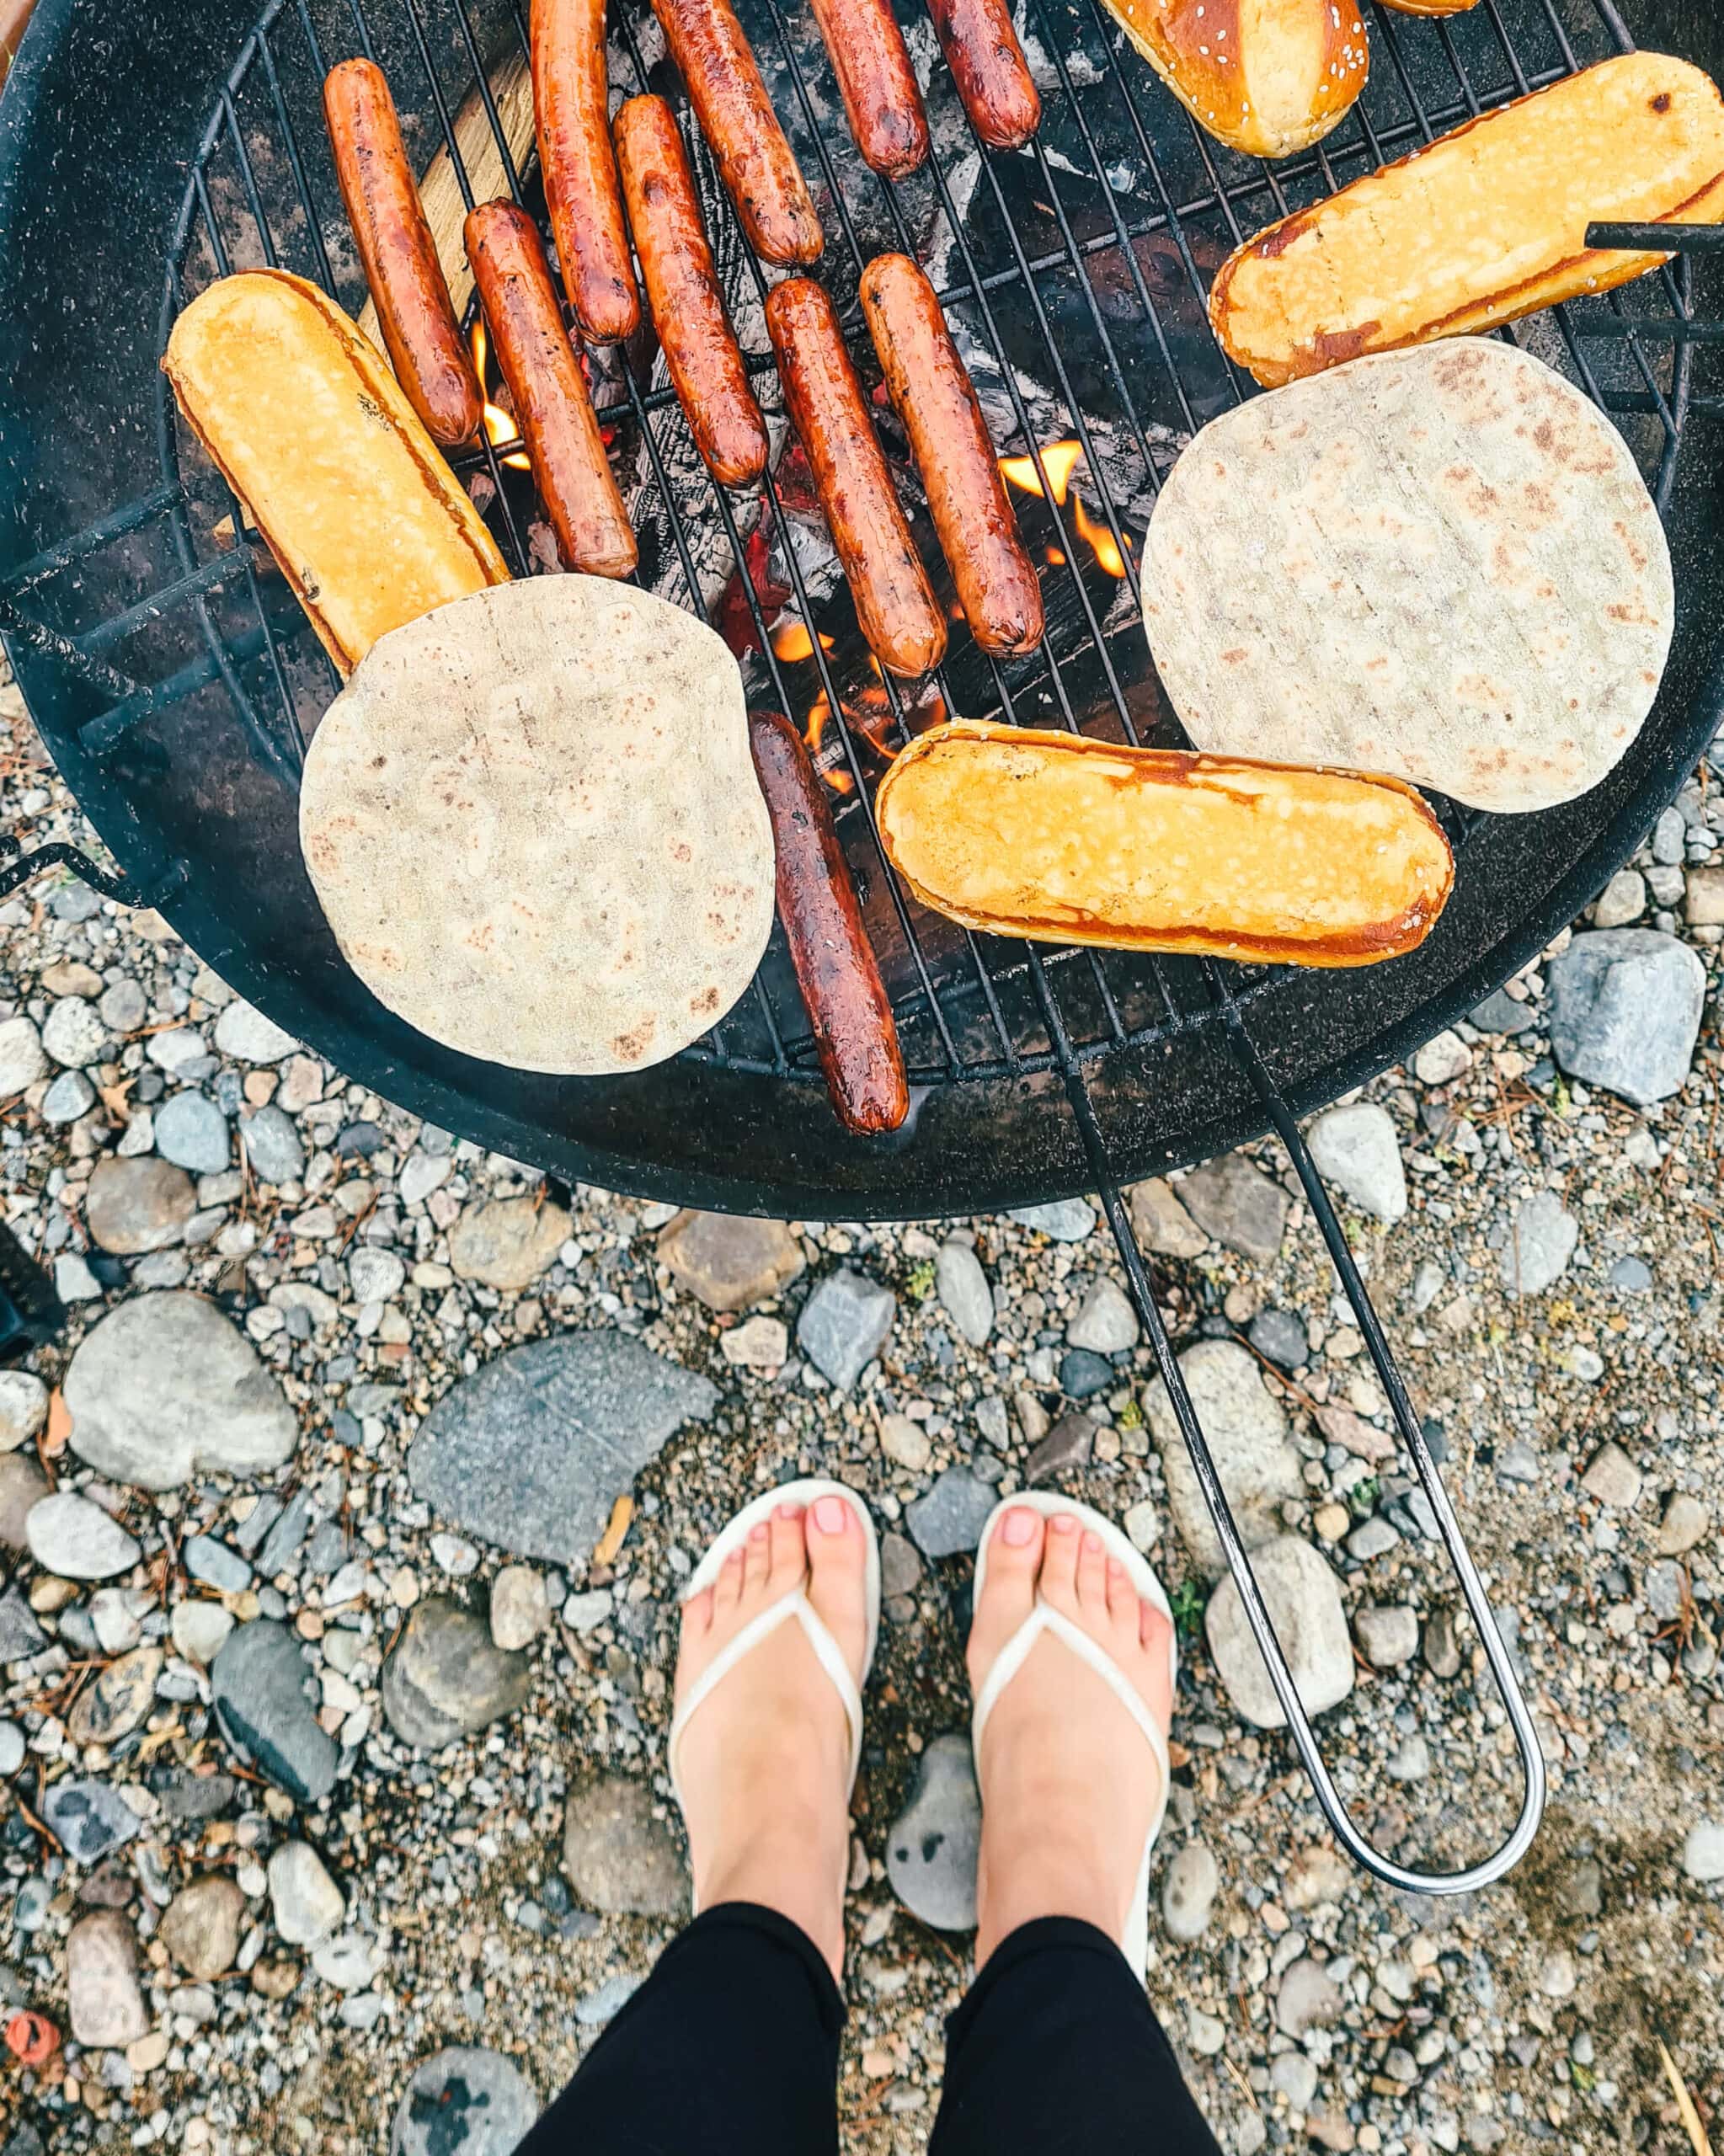 Grilling hot dogs on a public grill to cut down on travel costs in Norway.